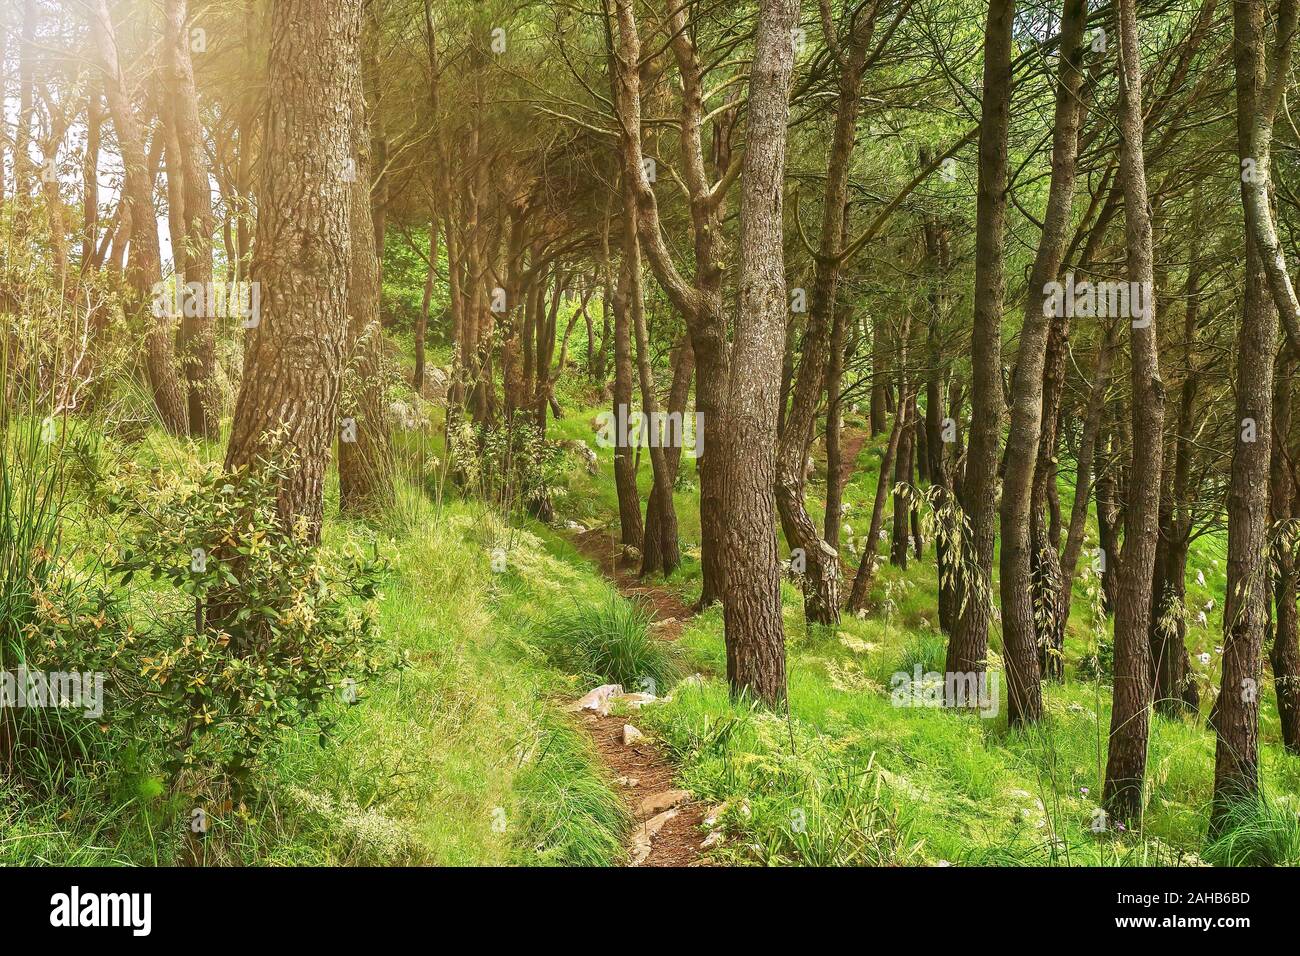 A Peaceful Green Forest Nature Scene With A Small Dirt Walking Path Between Pine Tree Trunks Shot Near The San Costanzo Hill In Campania Italy Stock Photo Alamy